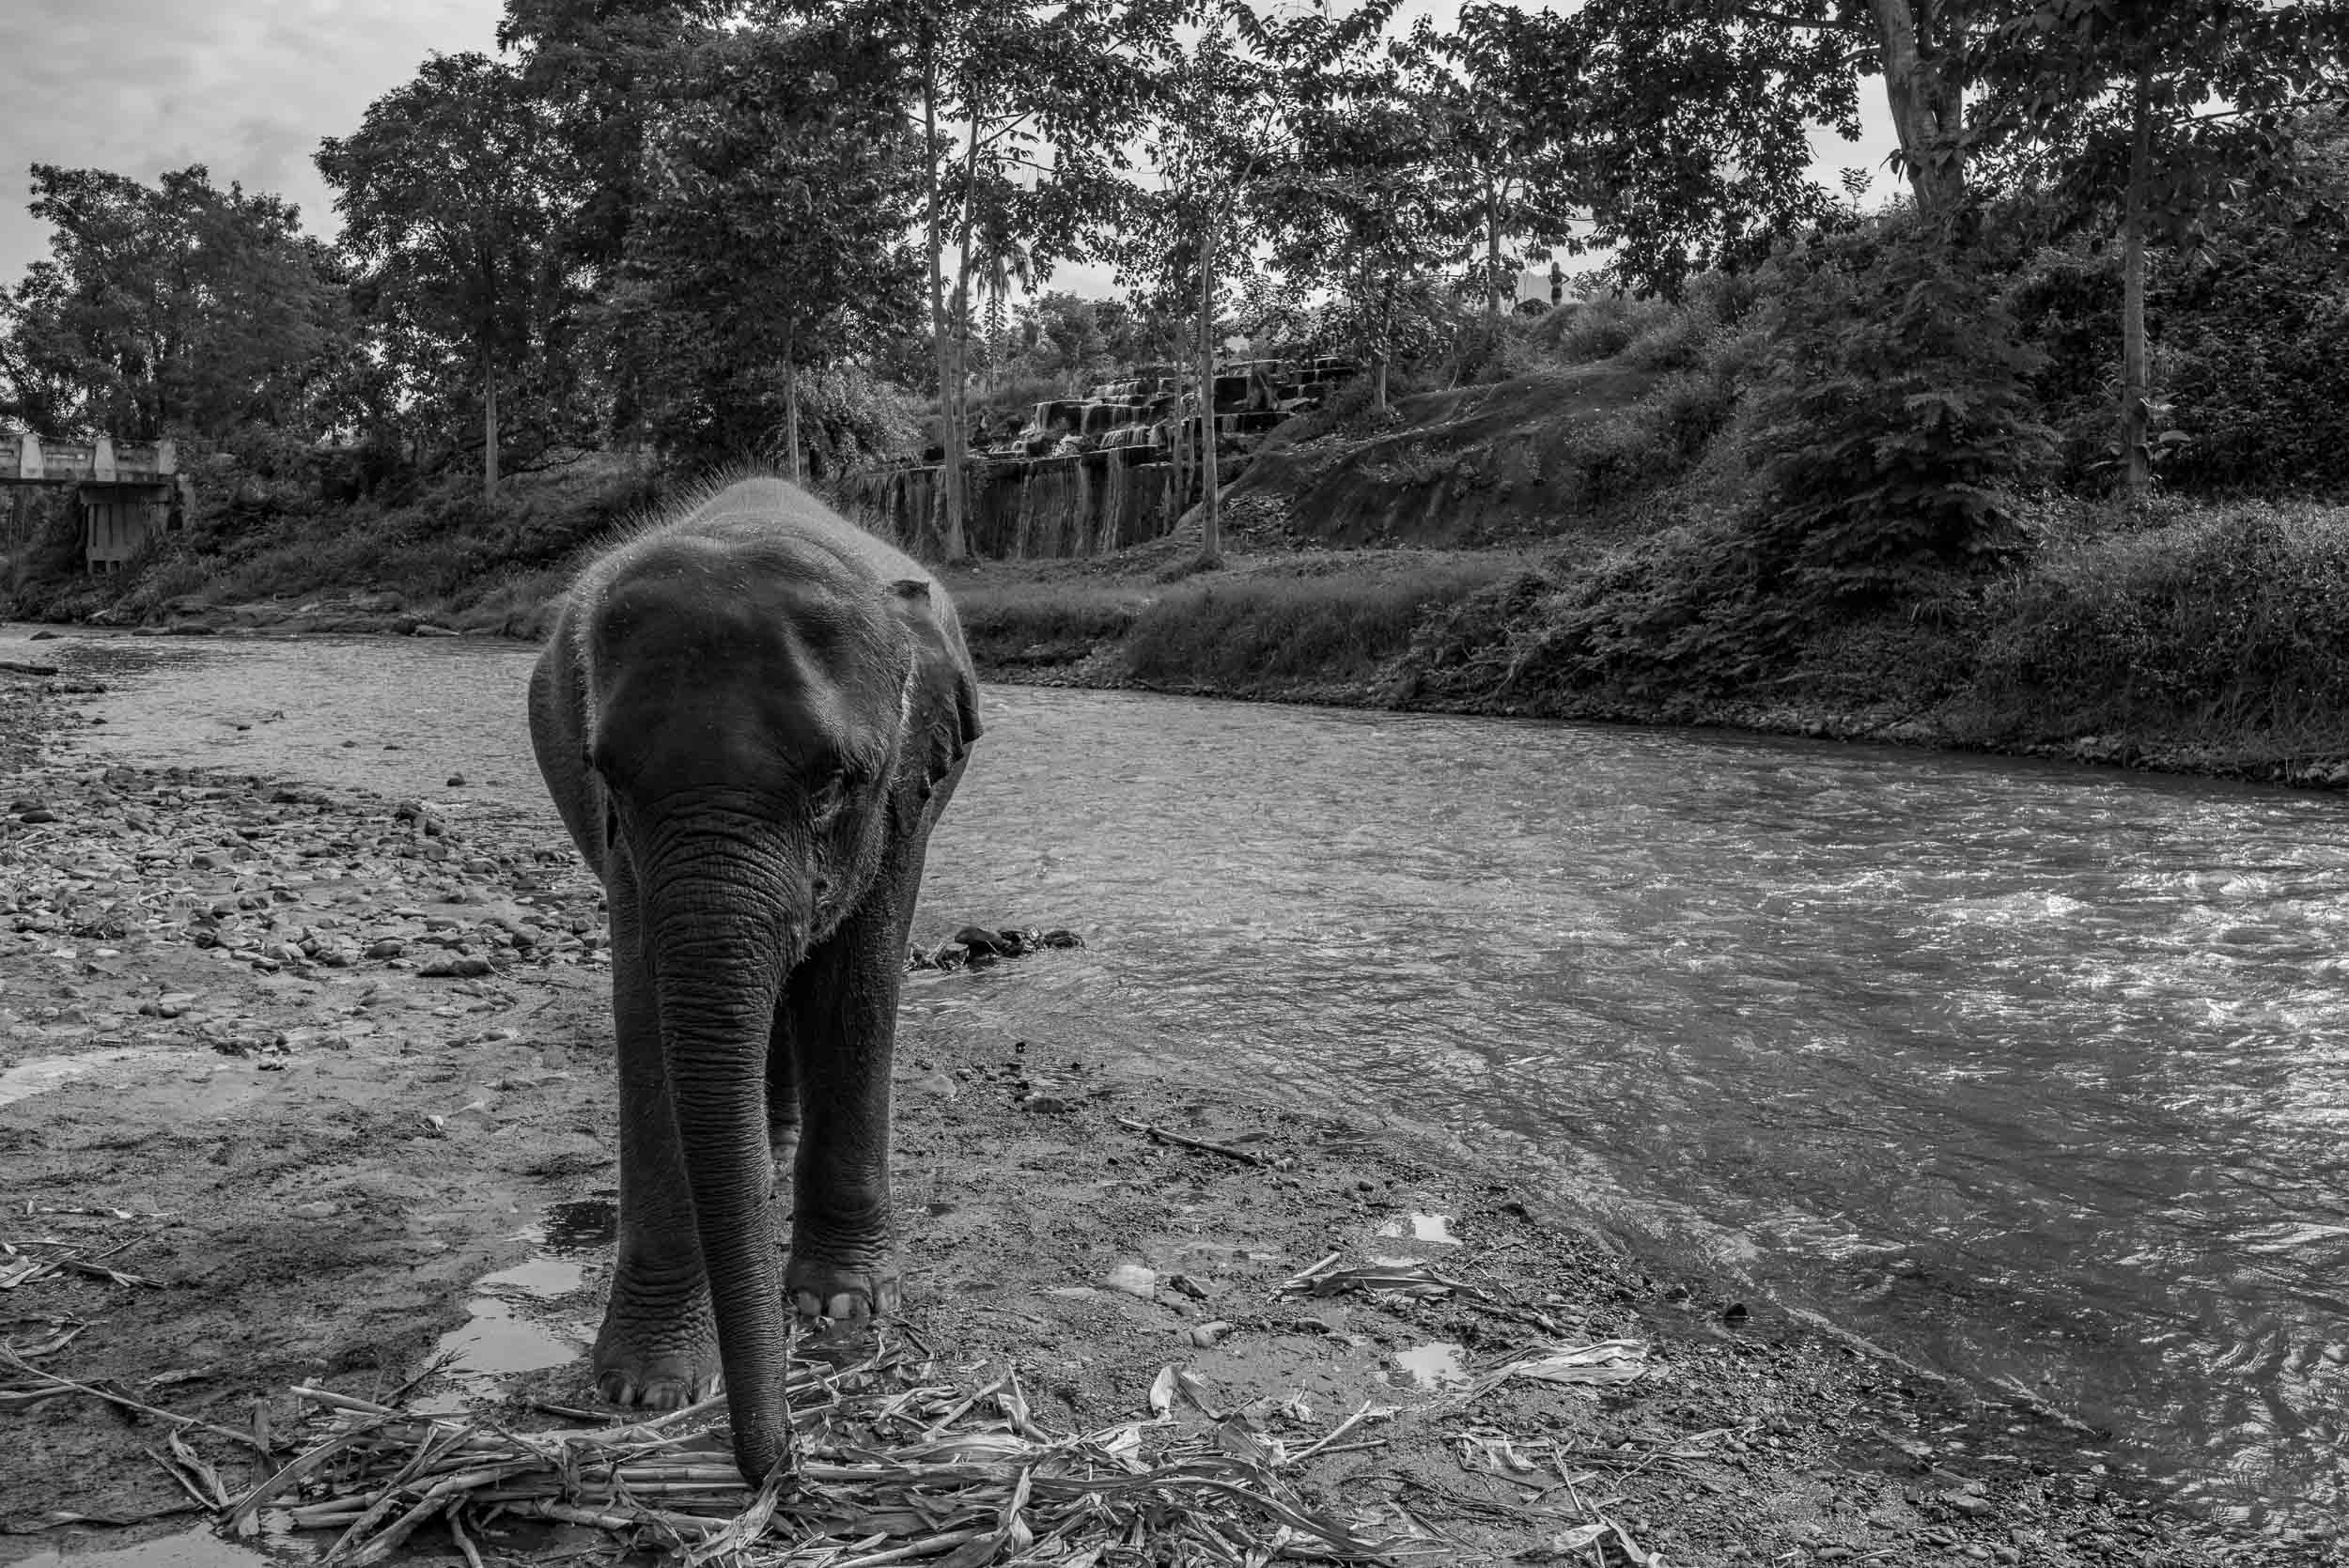 Elephant on the River